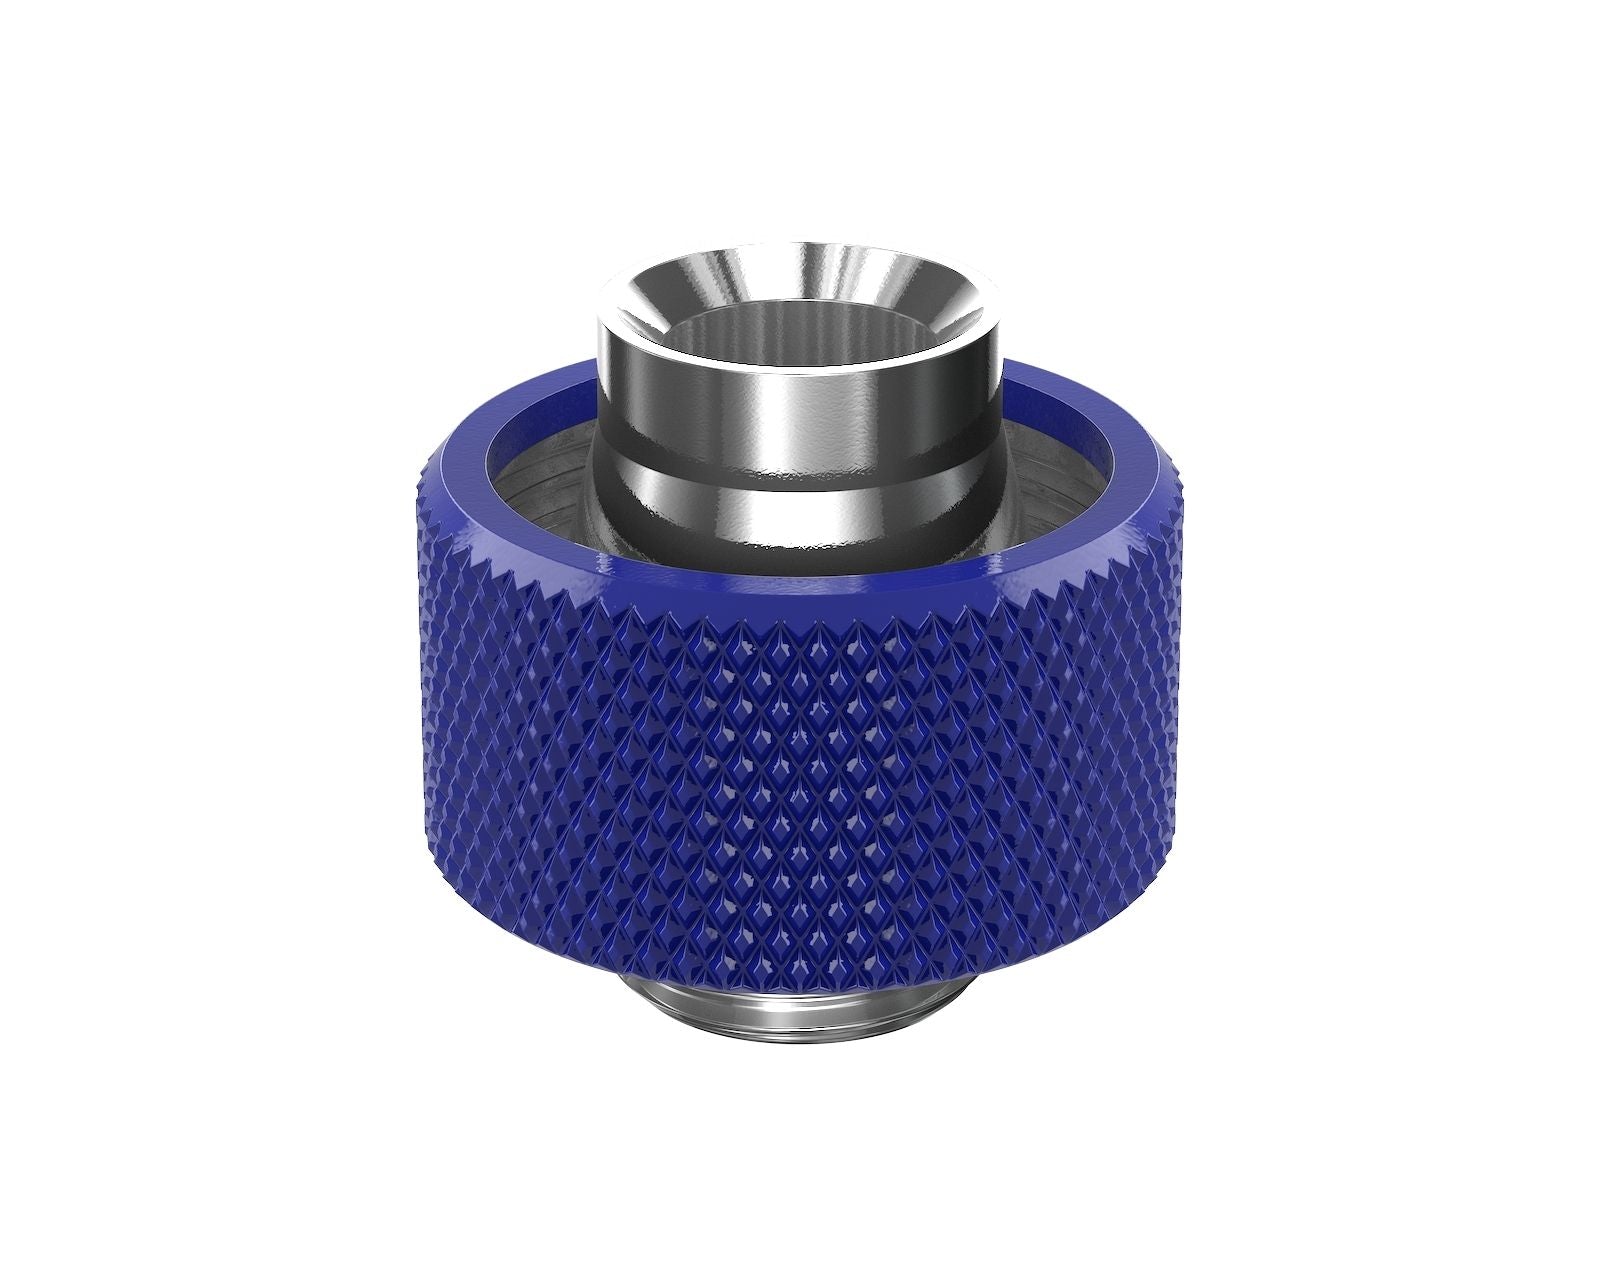 PrimoChill SecureFit SX - Premium Compression Fitting For 1/2in ID x 3/4in OD Flexible Tubing (F-SFSX34) - Available in 20+ Colors, Custom Watercooling Loop Ready - True Blue